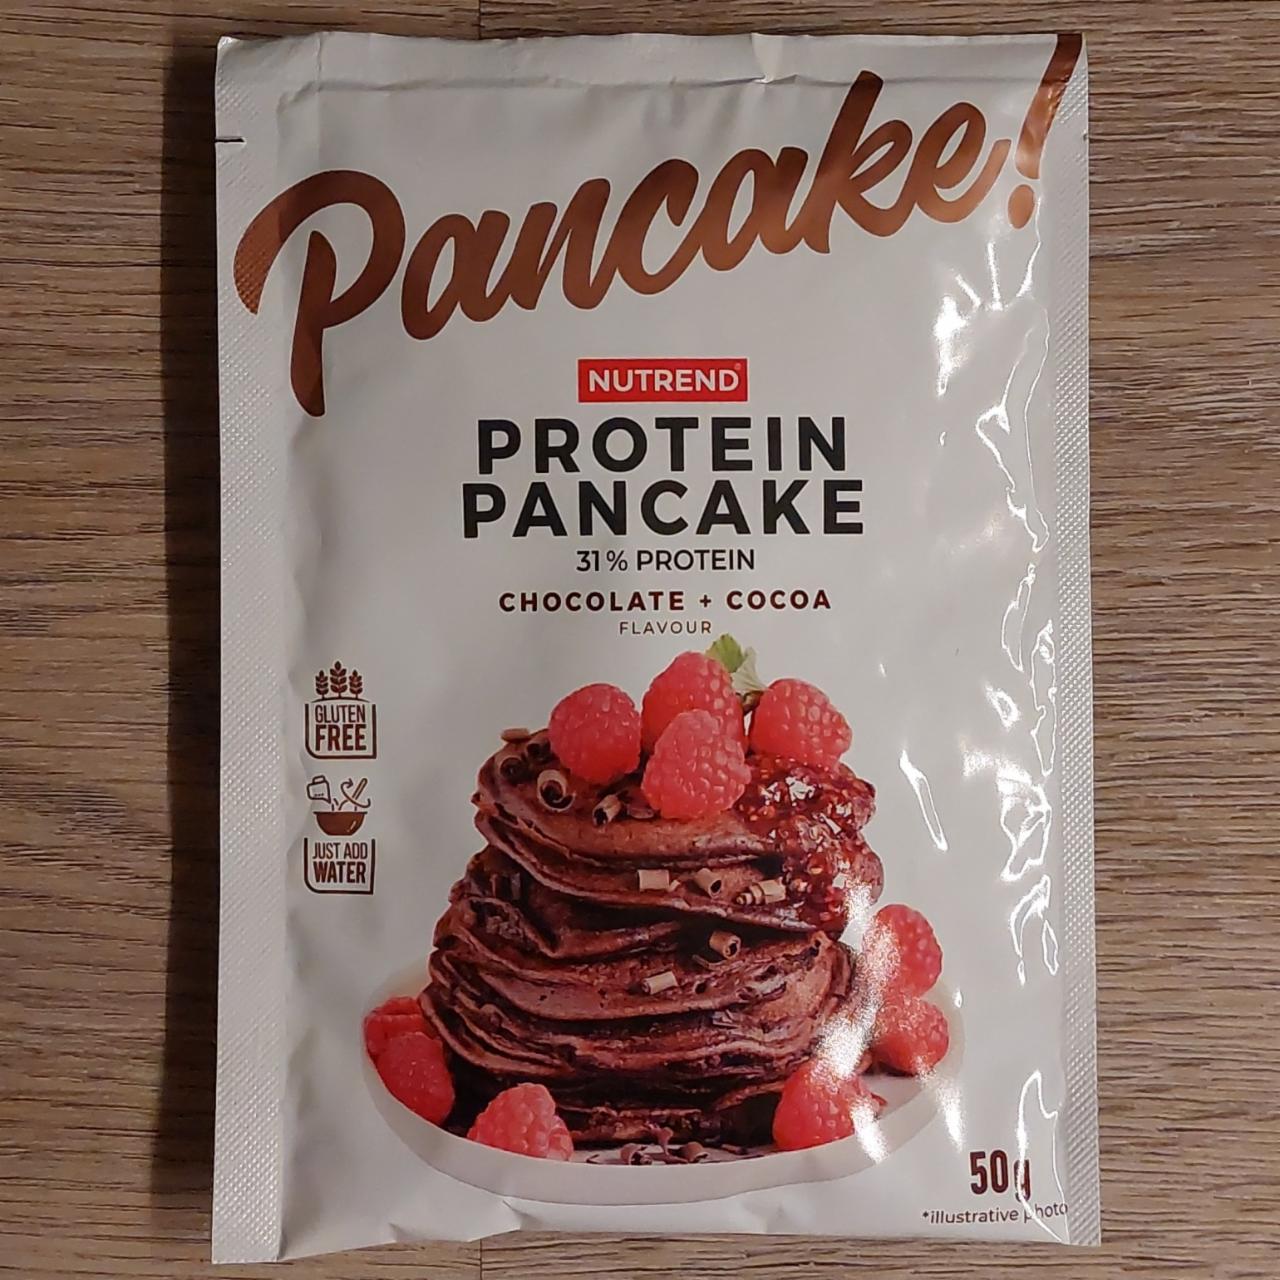 Fotografie - Protein Pancake chocolate + cocoa Nutrend